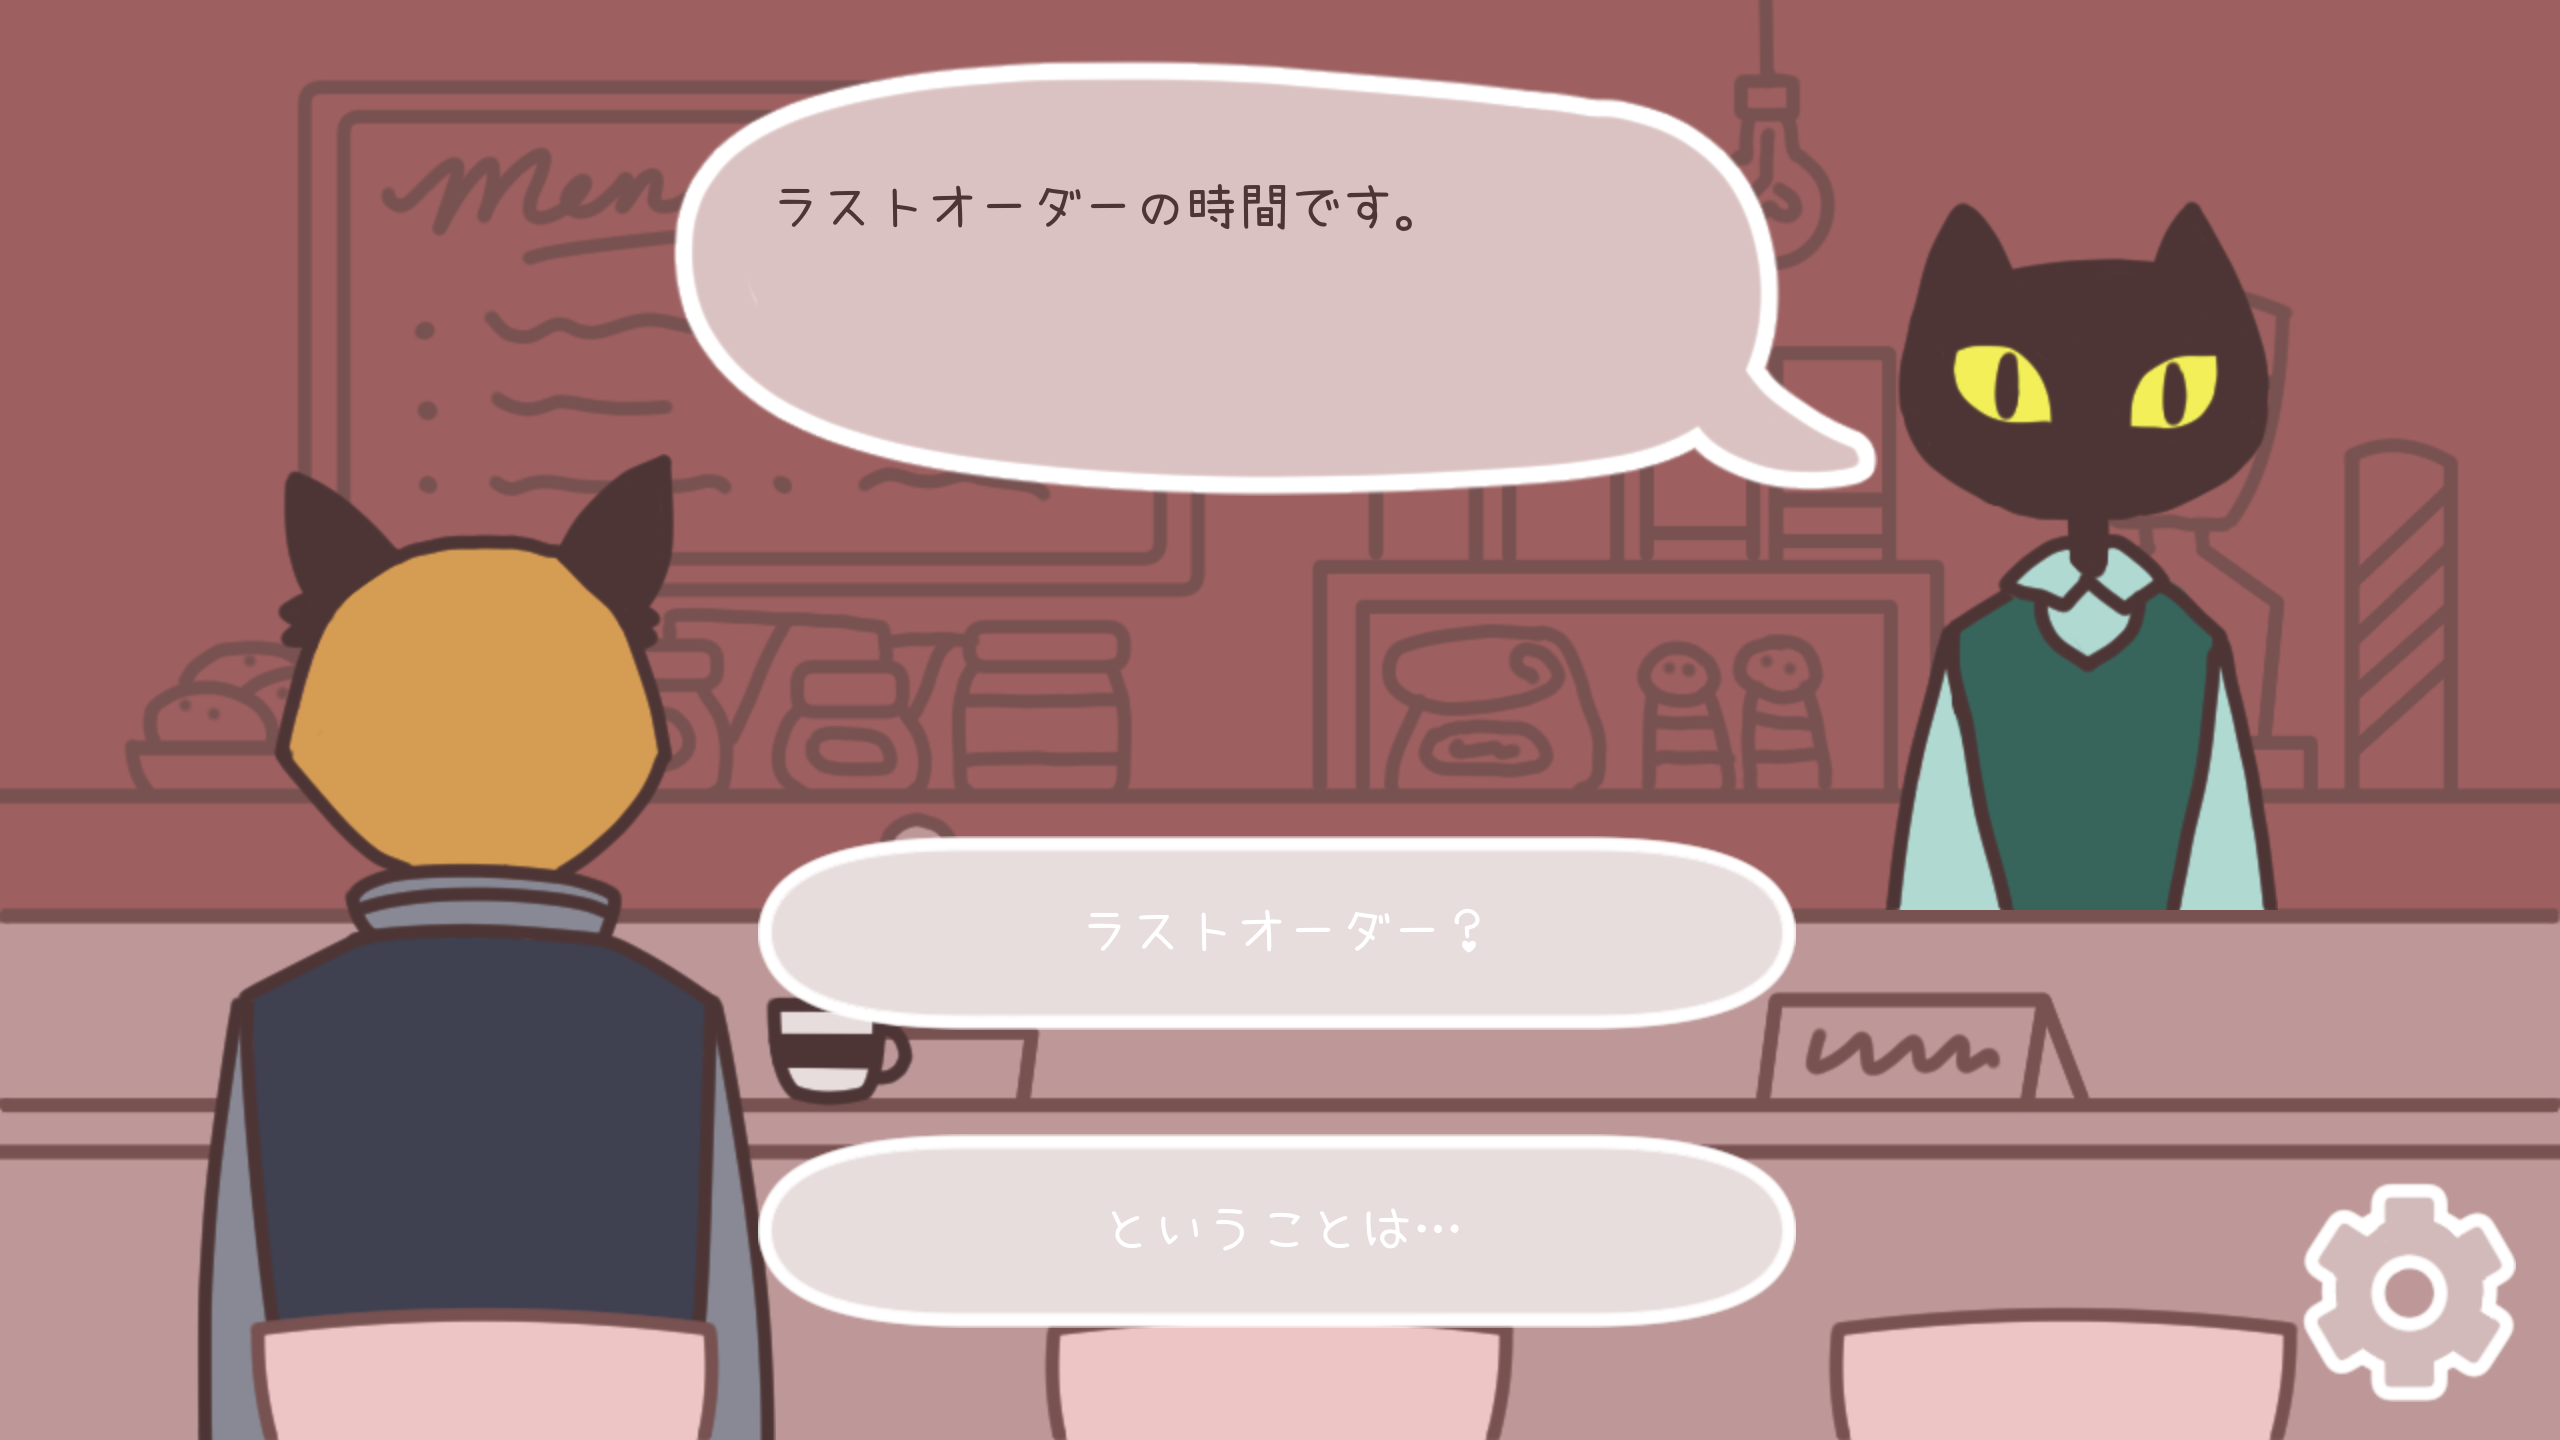 An illustrated scene in a cafe. A barista, who appears as an, black cat, stands behind a counter. Another feline-like anthropromorphic character has their back turned to the viewer, sitting in a chcair in front of the counter. A speech bubble with Japanese text emerges from the black cat, and dialogue options written in Japanese characters appear on the screen.